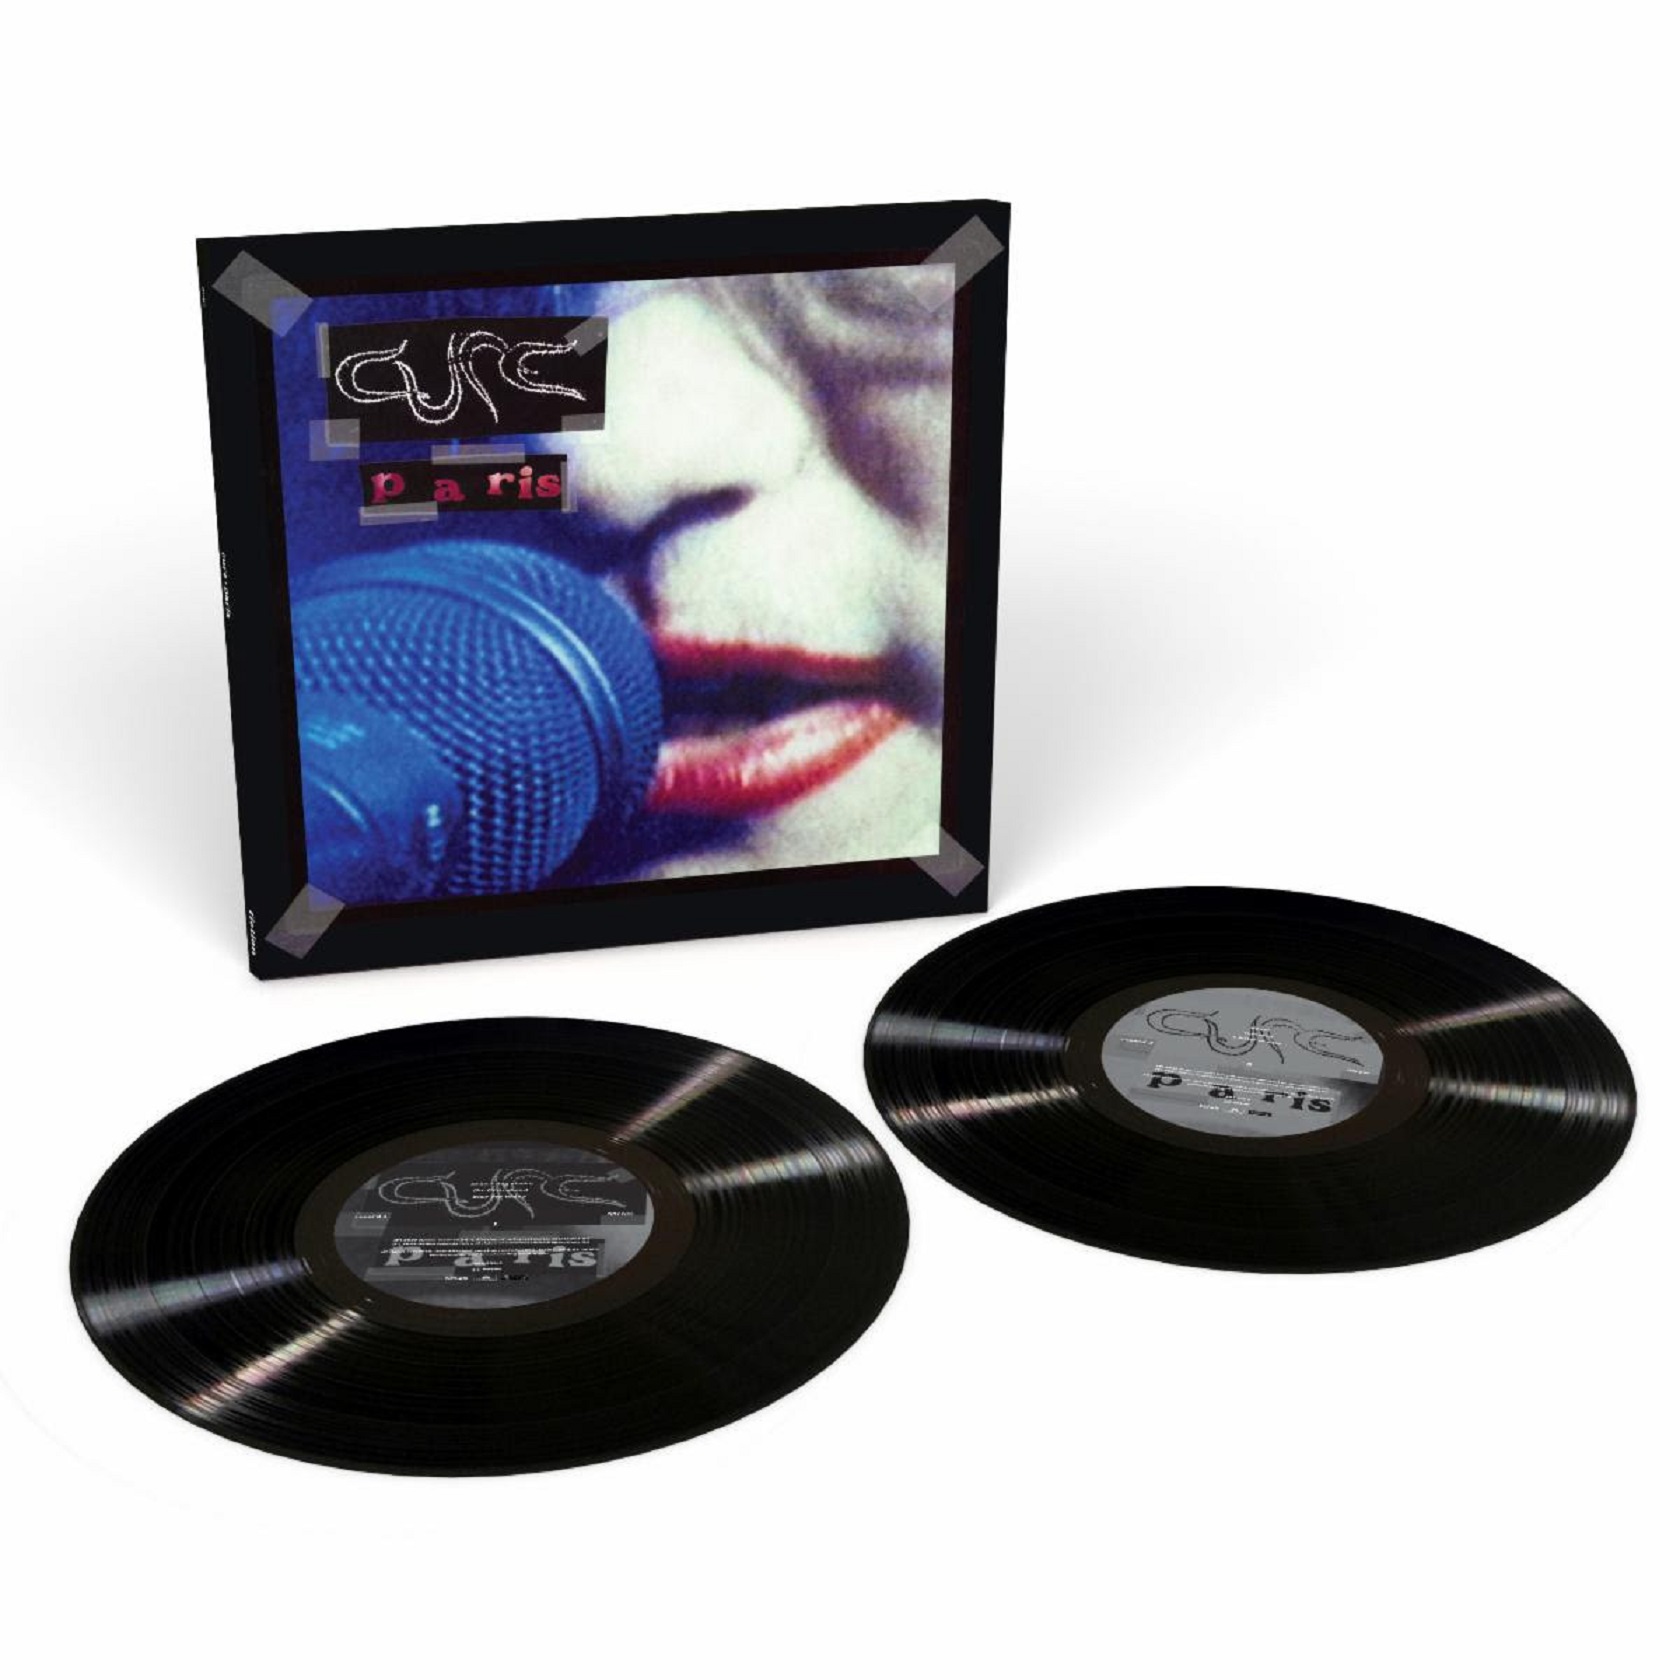 Rhino announces 30th anniversary edition of The Cure's 'Paris’ ft. two unreleased tracks